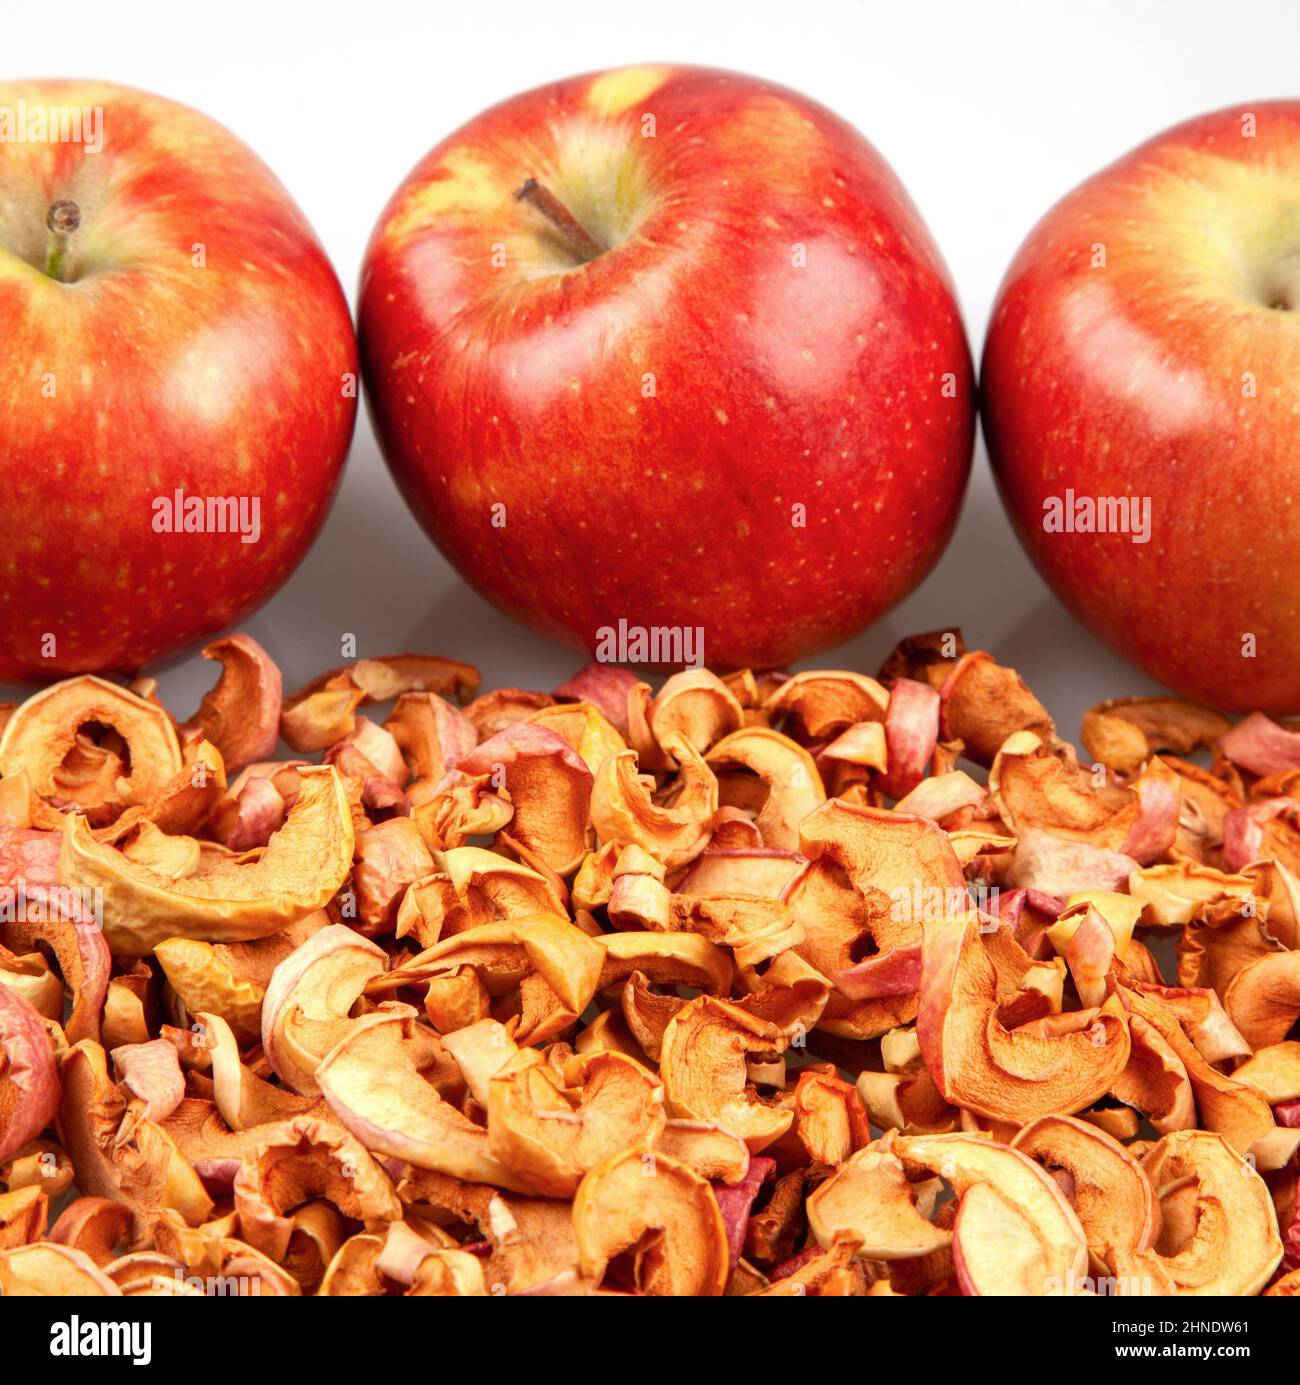 Fresh red apples on dried apple slices Stock Photo